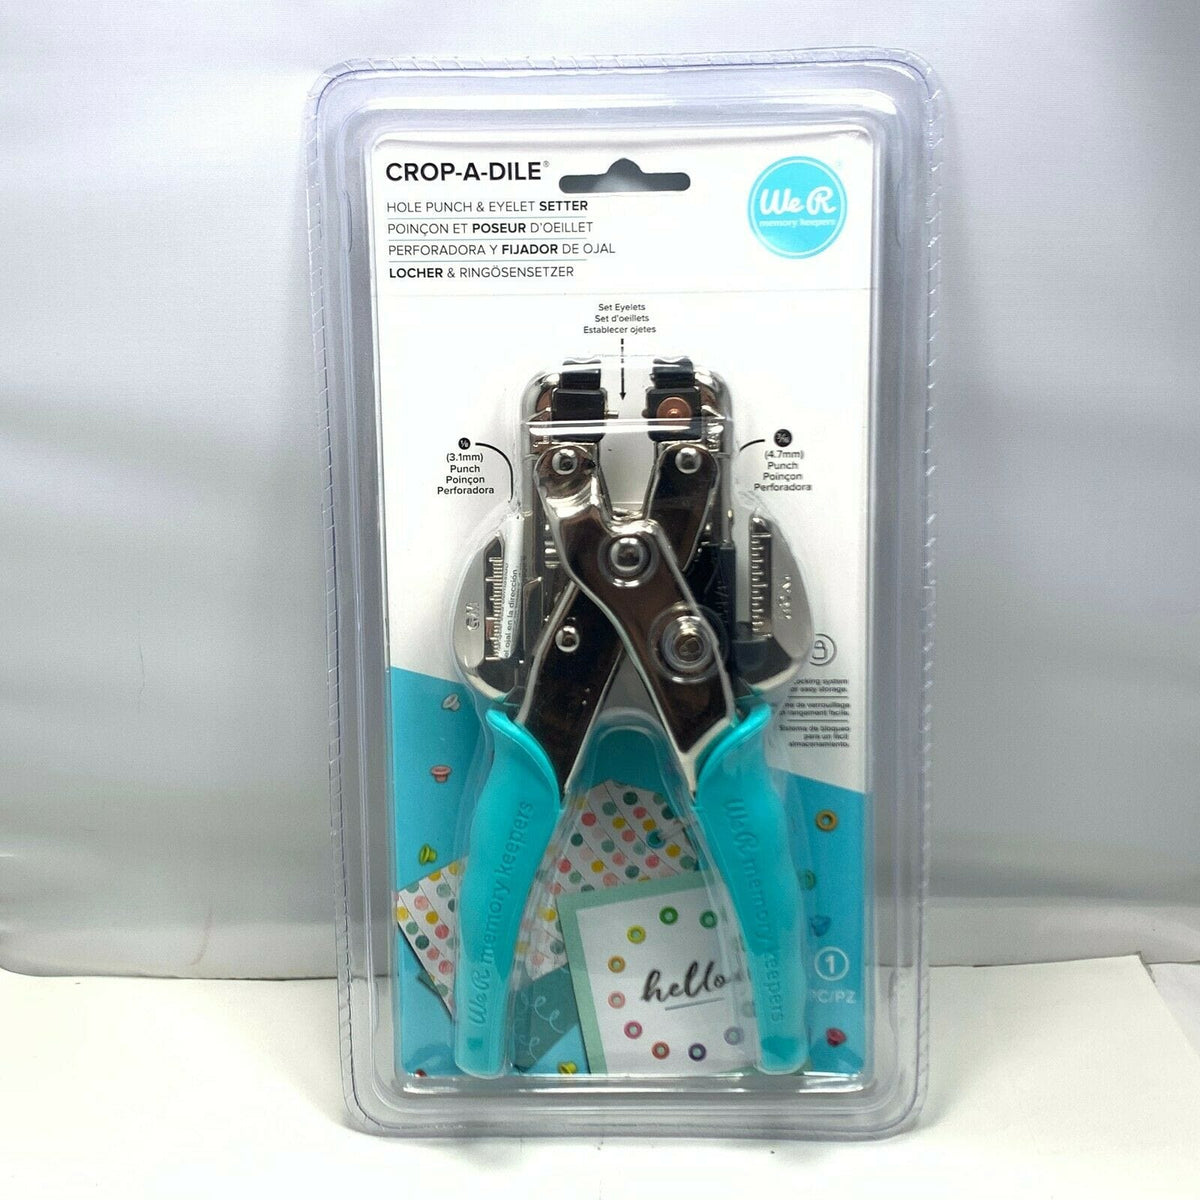 Crop-A-Dile Hole Punch & Eyelet Setter